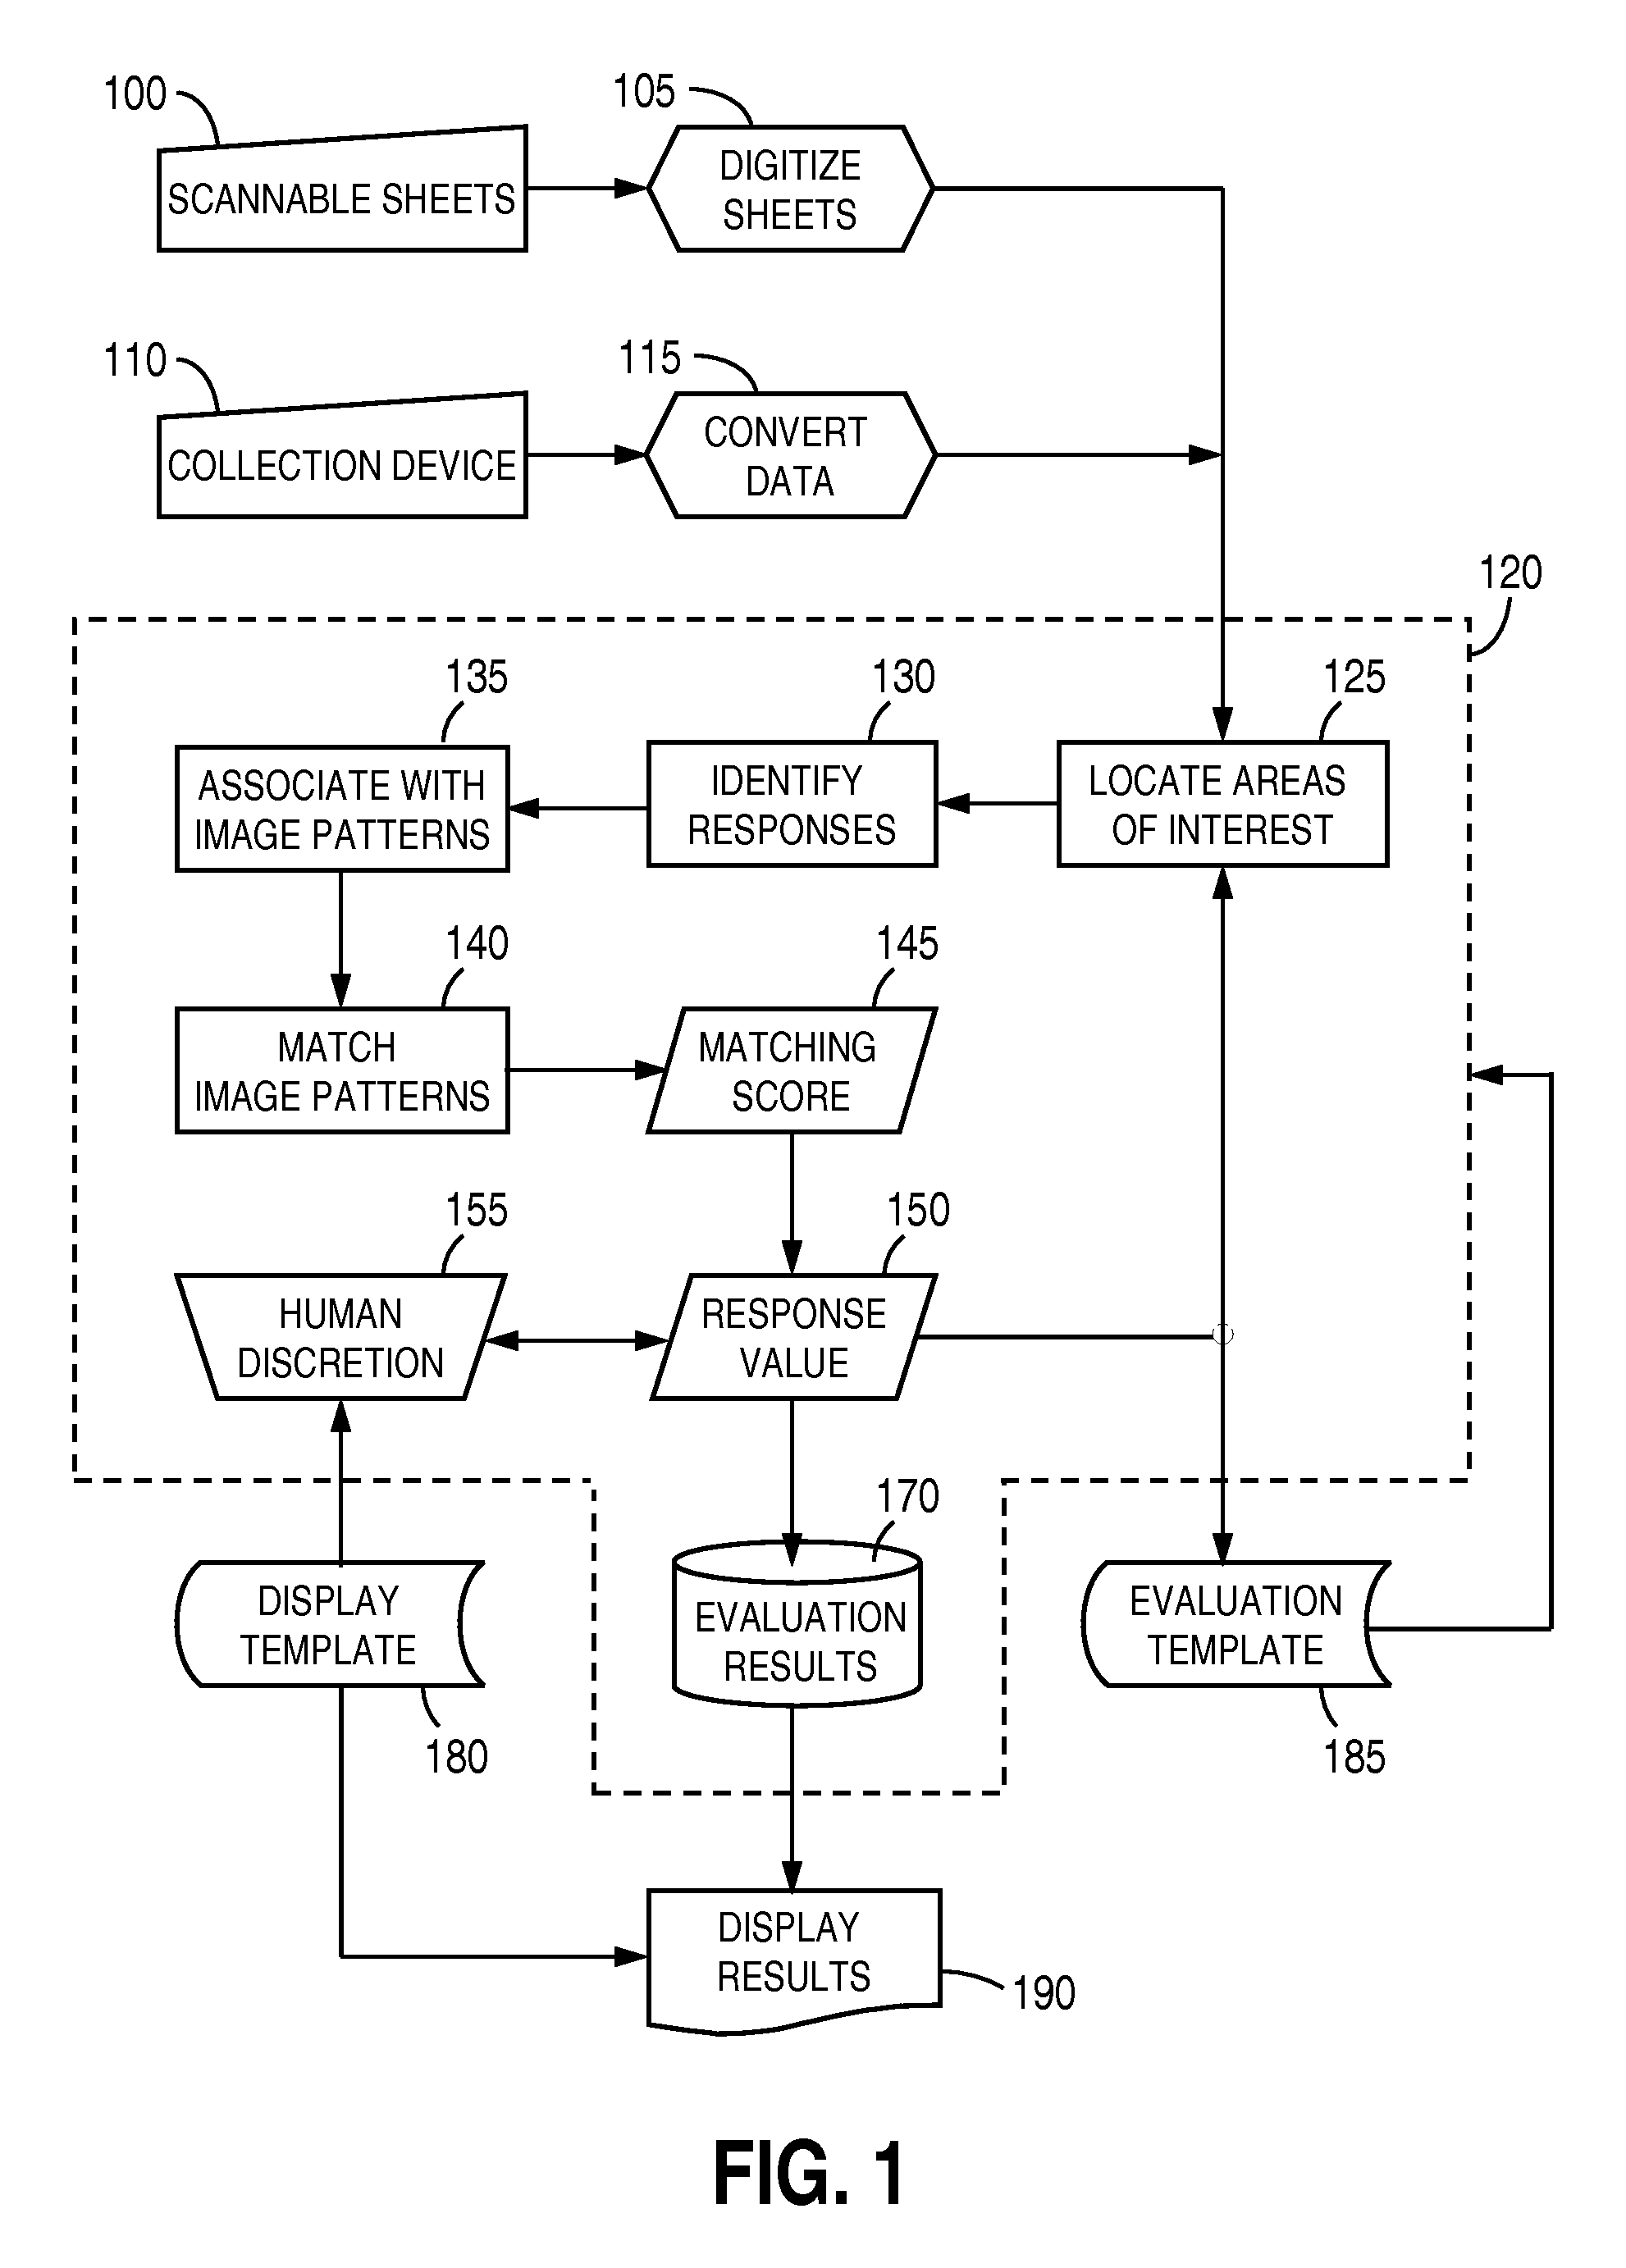 Computerized processing of pictorial responses in evaluations